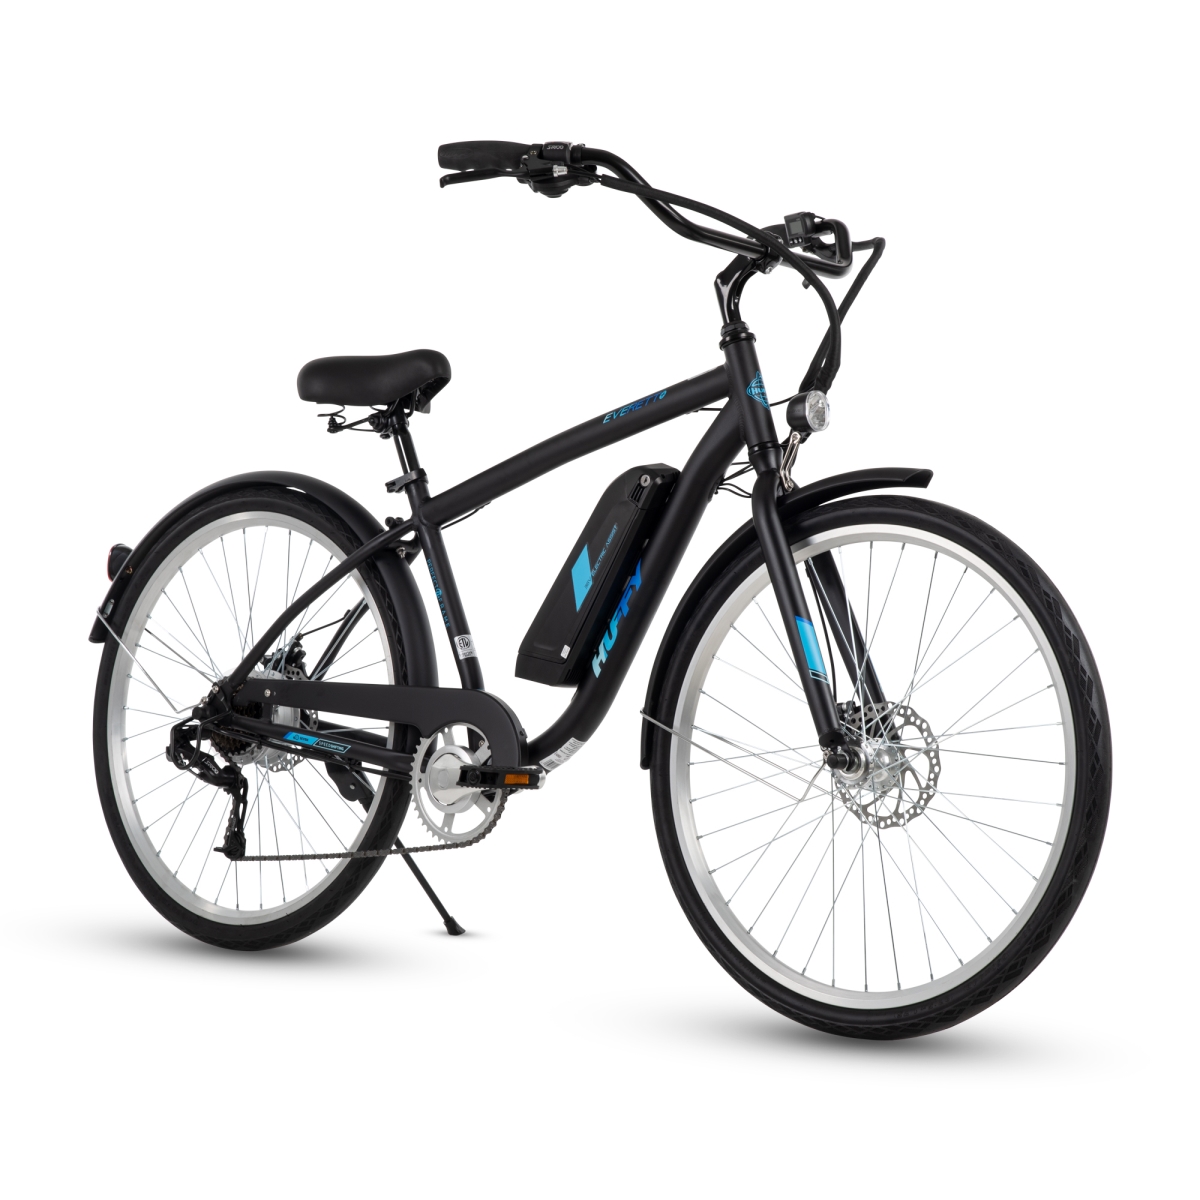 E4860 Huffy Everett+ &' Electric Comfort Bike for Men - Pedal assist up  to 20MPH